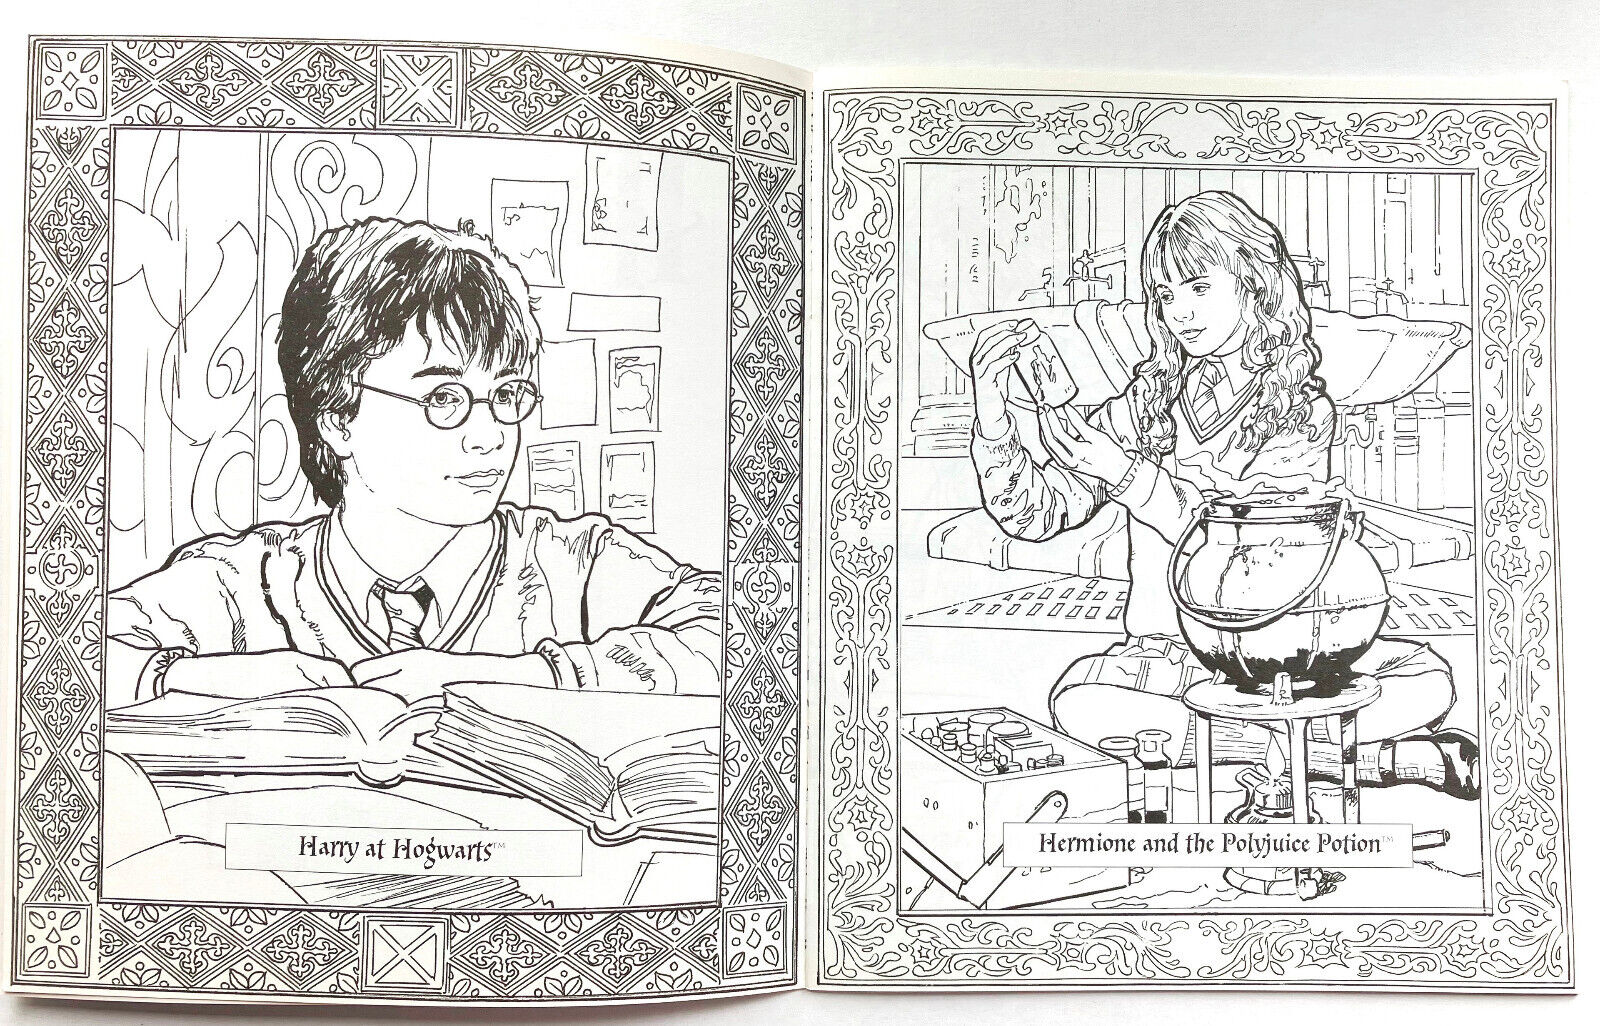 Hermione and the Polyjuice Potion, Harry Potter Coloring Book : r/Coloring